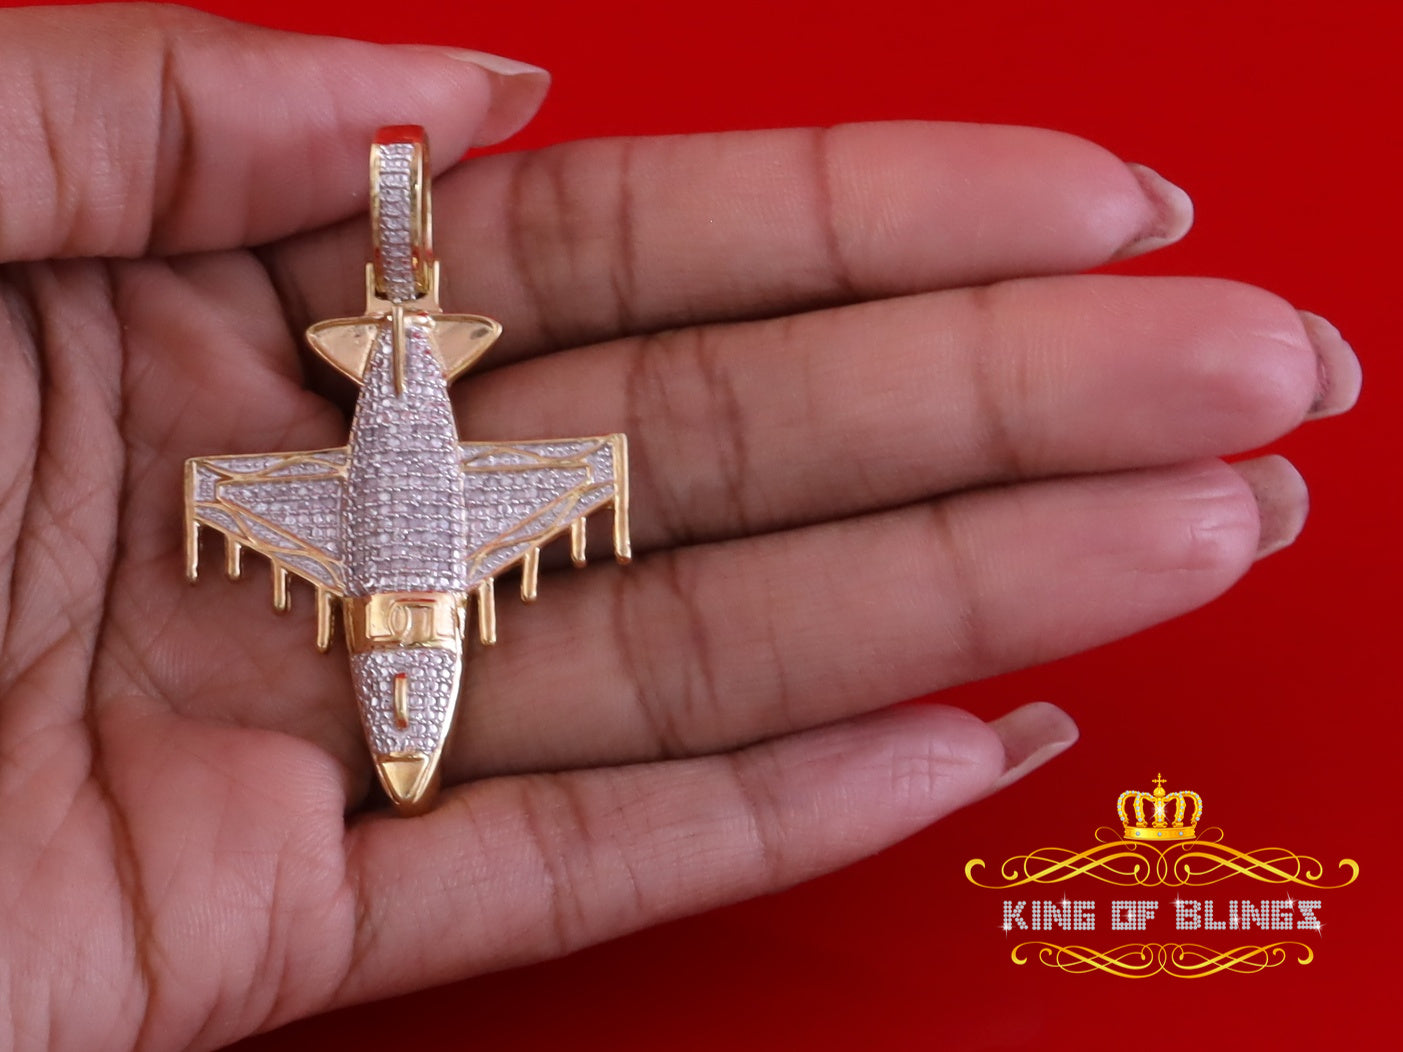 King Of Bling's 925 Sterling Silver Yellow Airoplane Pendant 0.33ct Genuine Diamond Stones King Of Blings